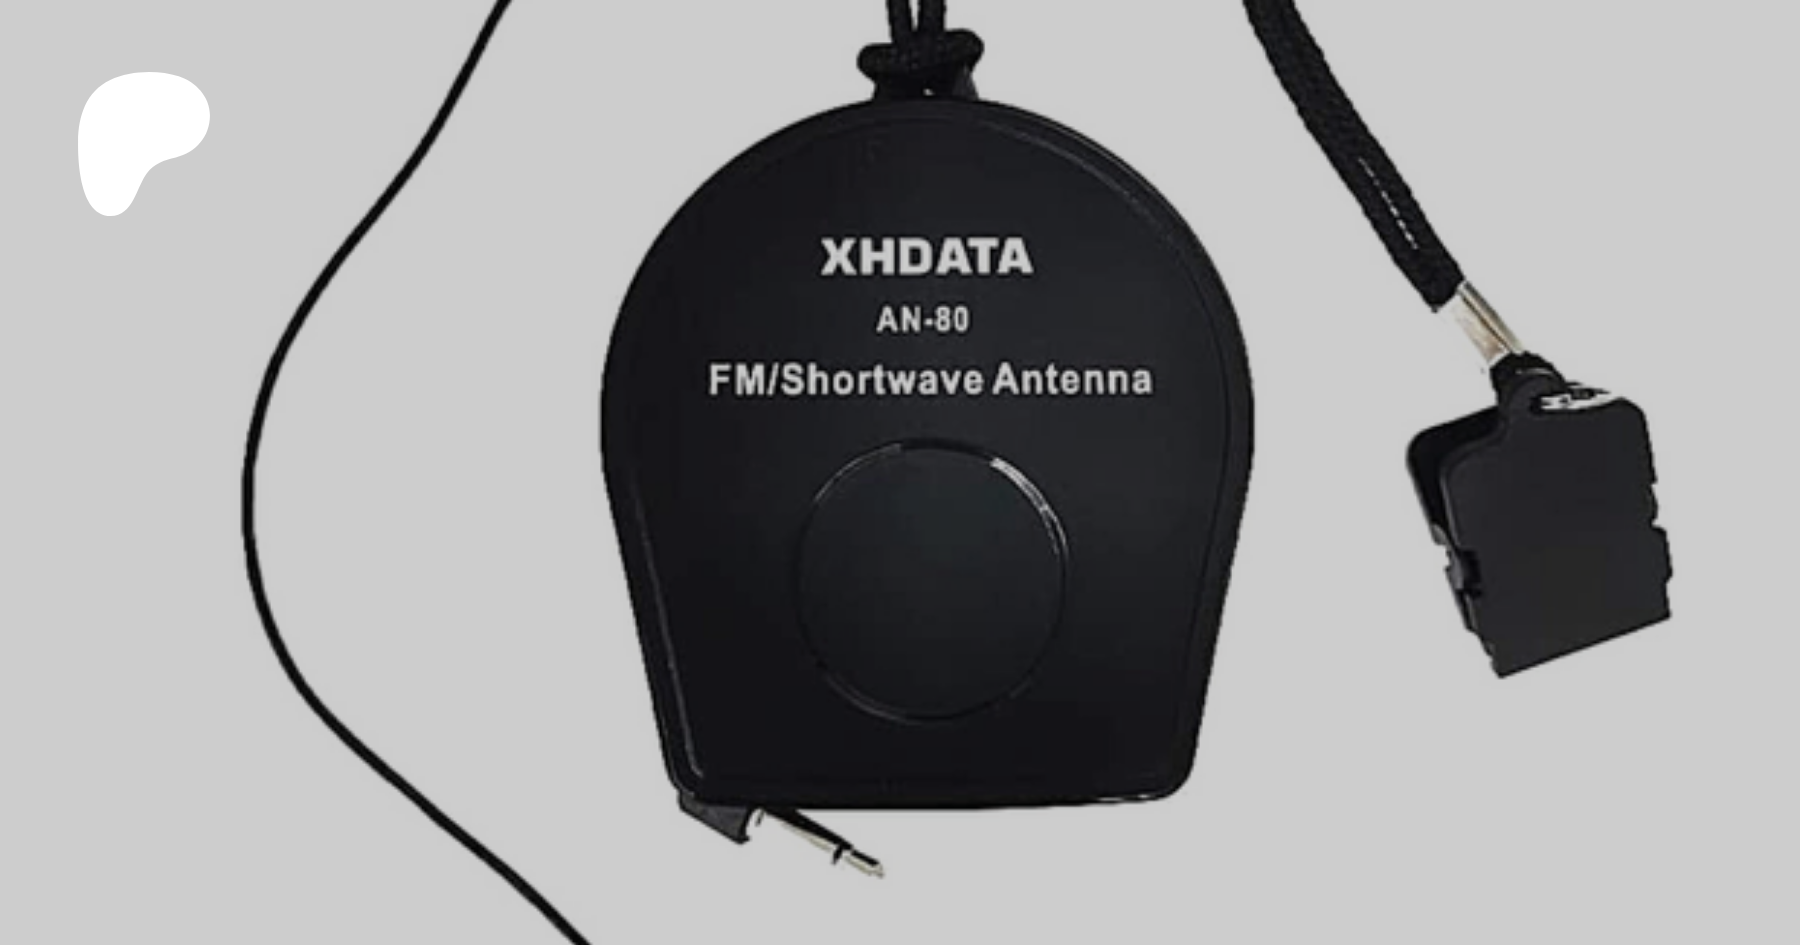 The XHDATA AN-80 Shortwave Reel Antenna & Adapter for $11!